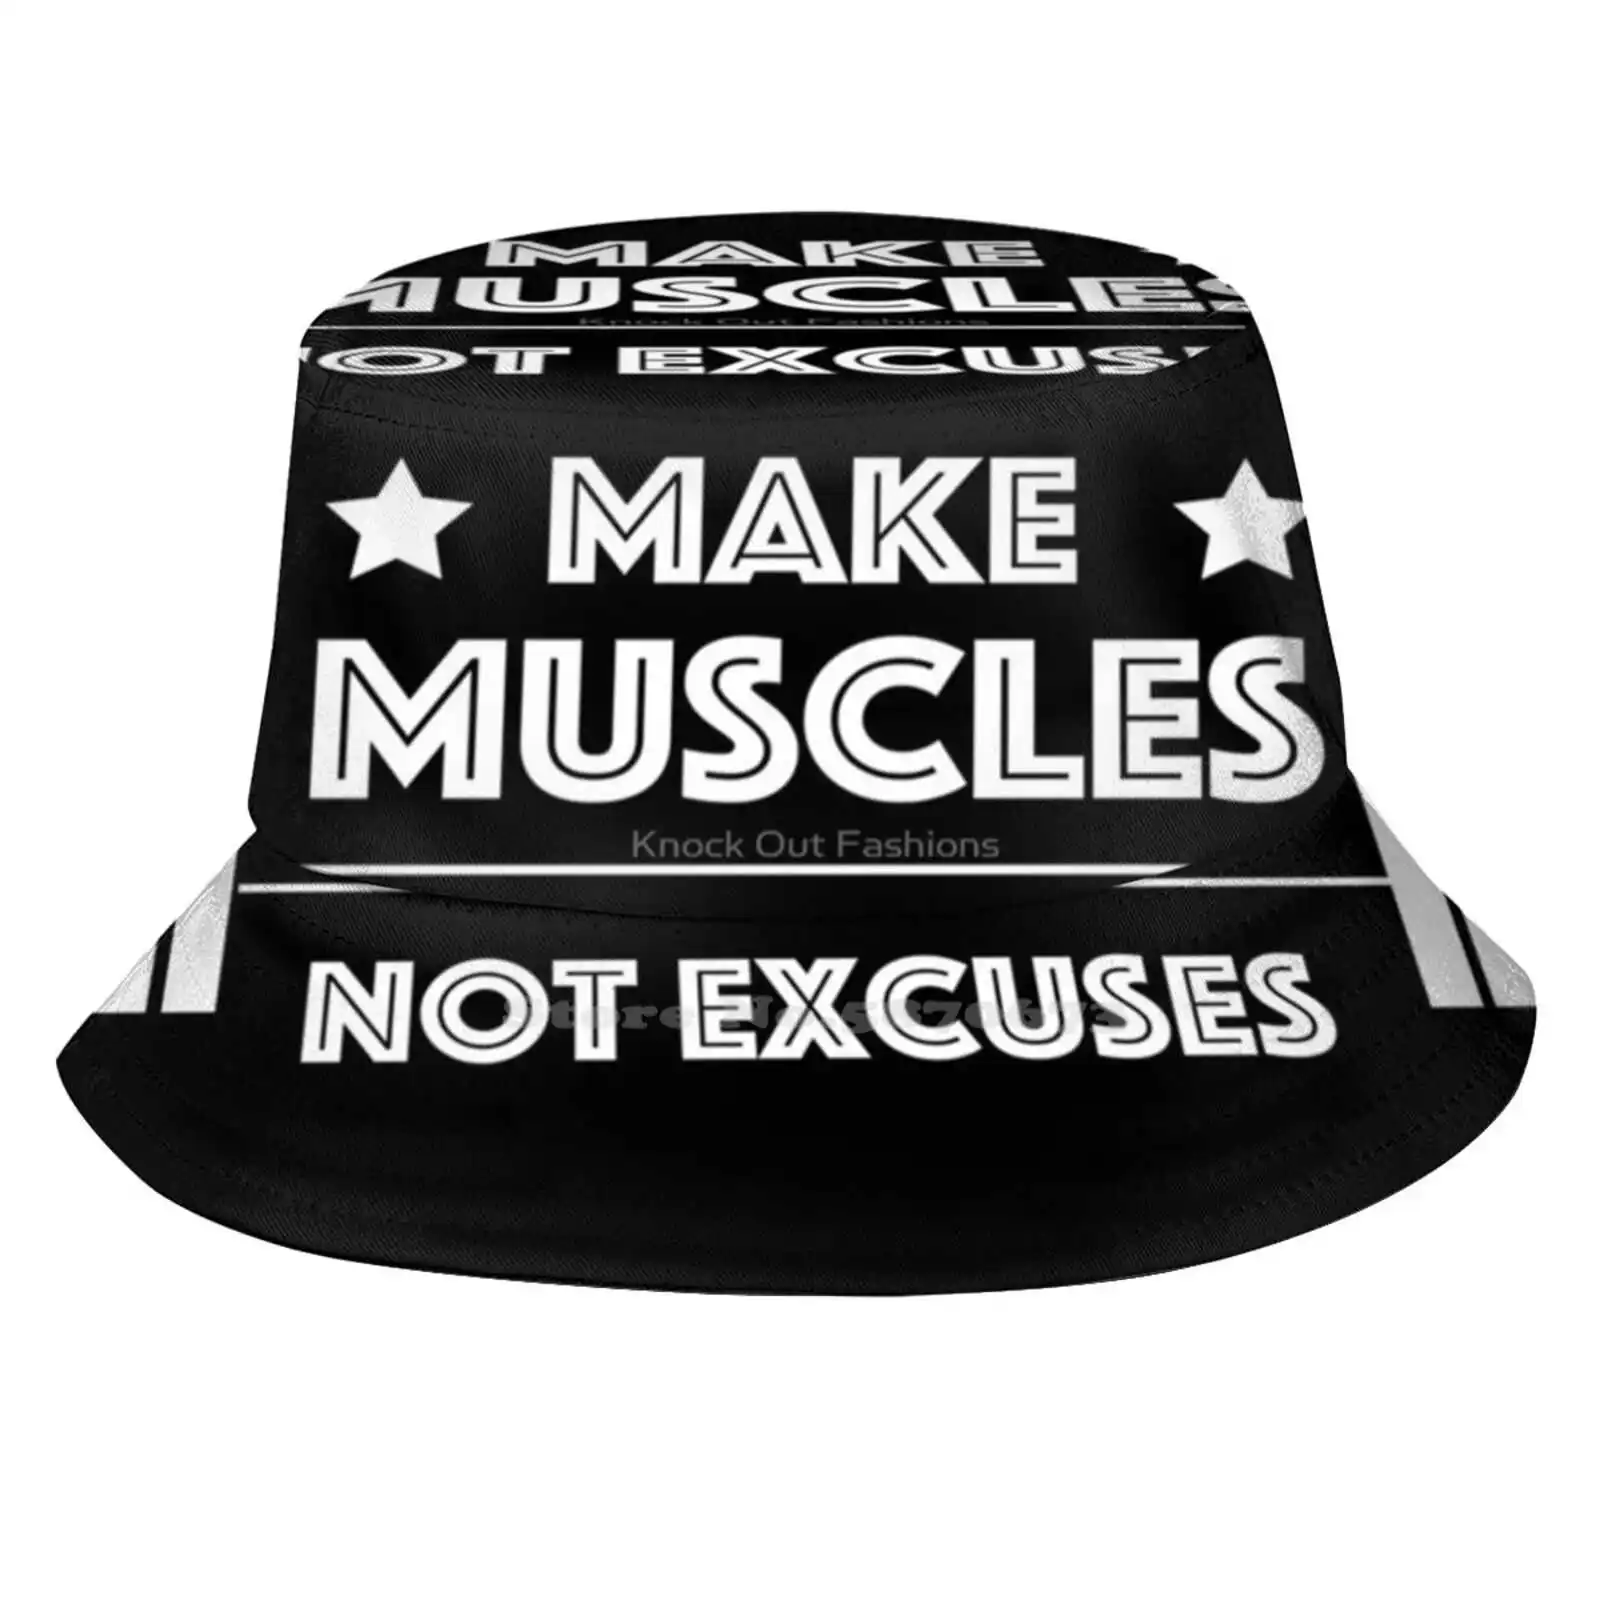 

Make Muscles Not Excuses Fisherman's Hat Bucket Hats Caps Workout Workout Gym Workout Fashion Workout Outfit Women Gymclothes